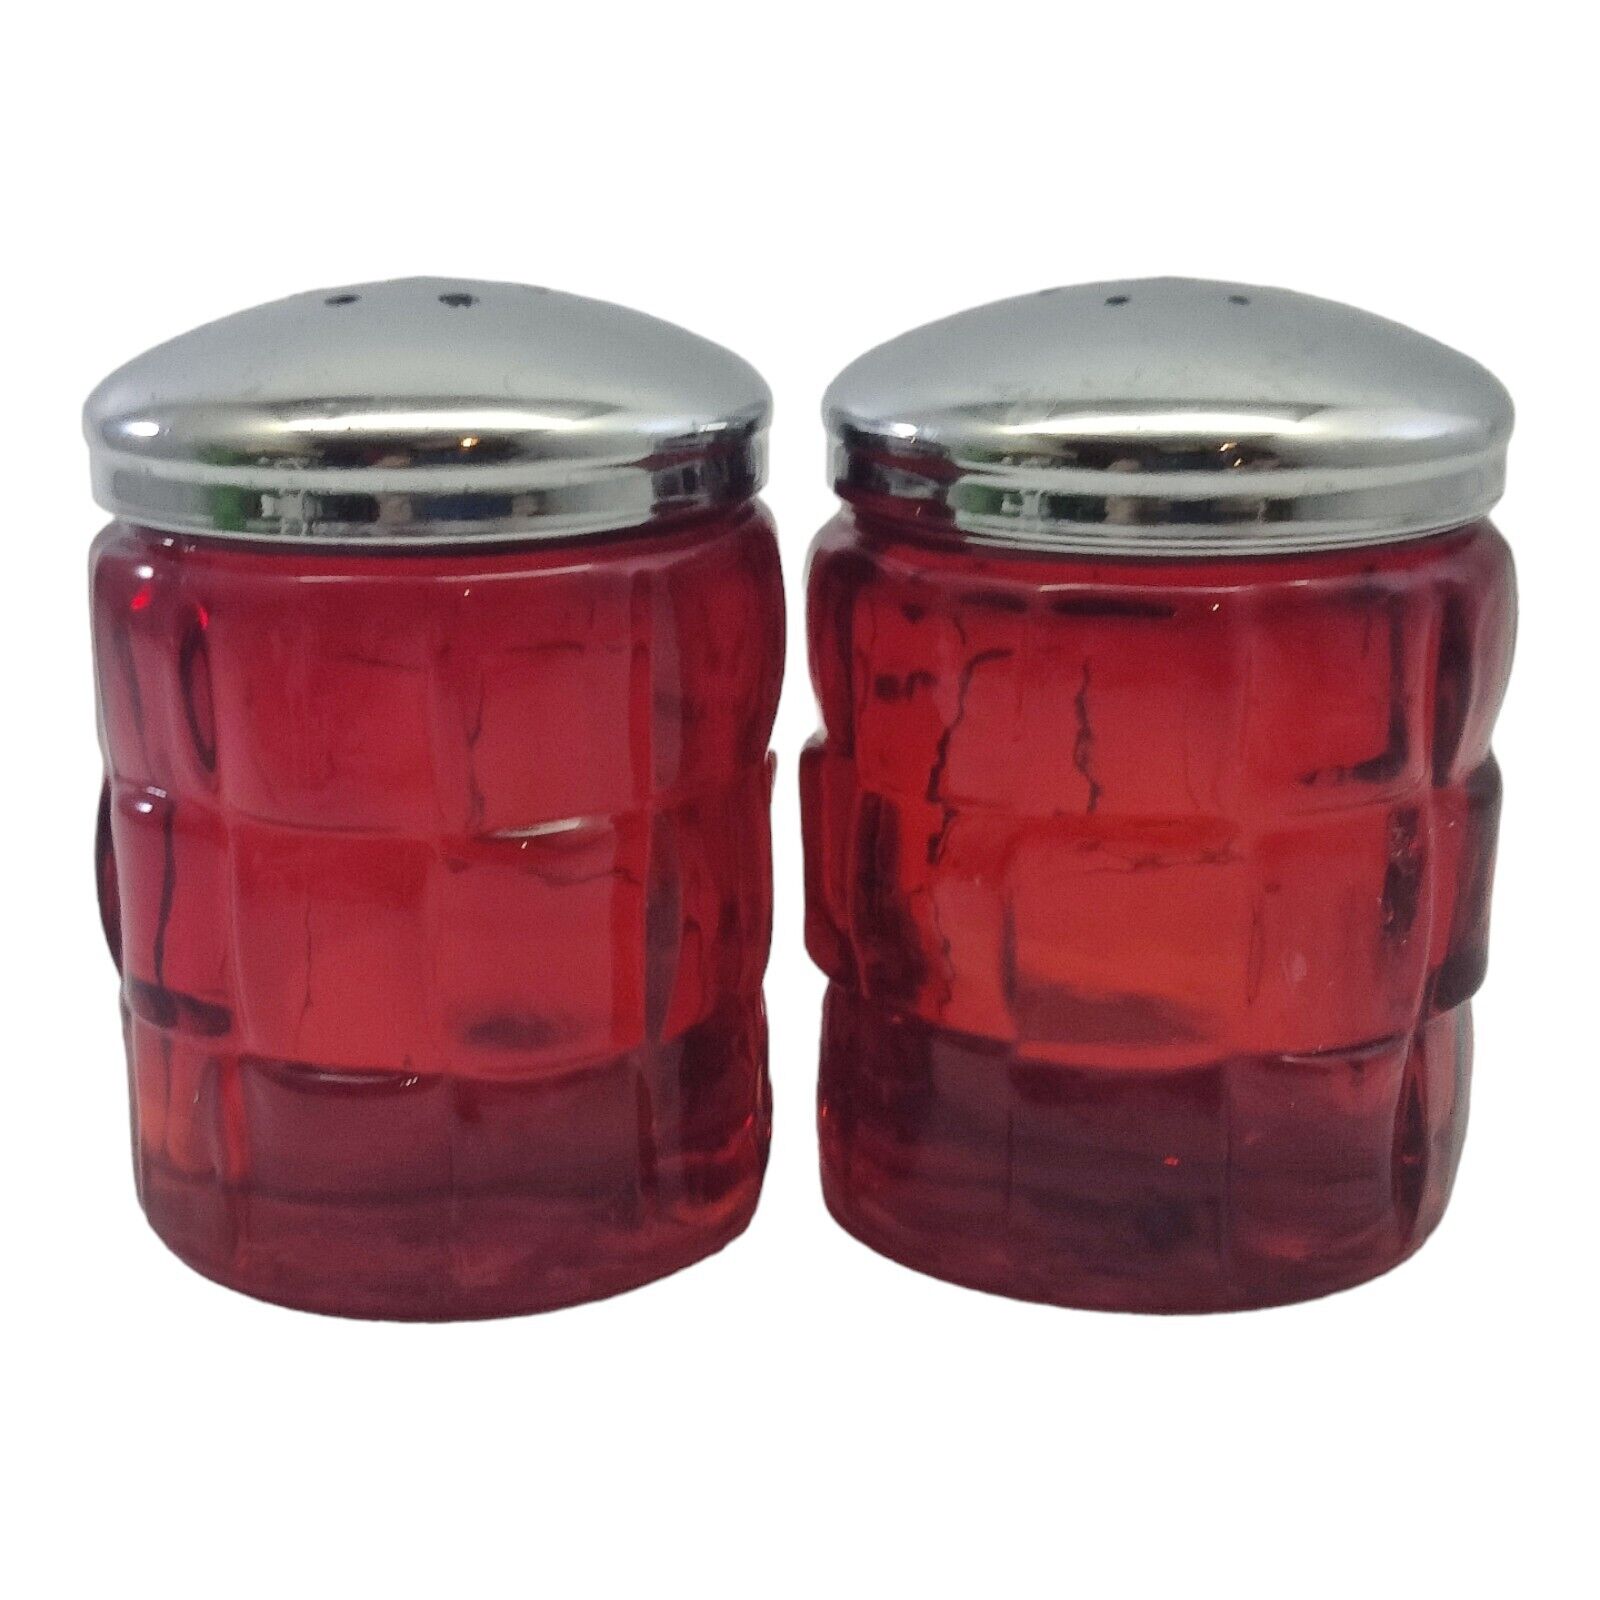 Vintage Ruby Glass Salt and Pepper Shakers